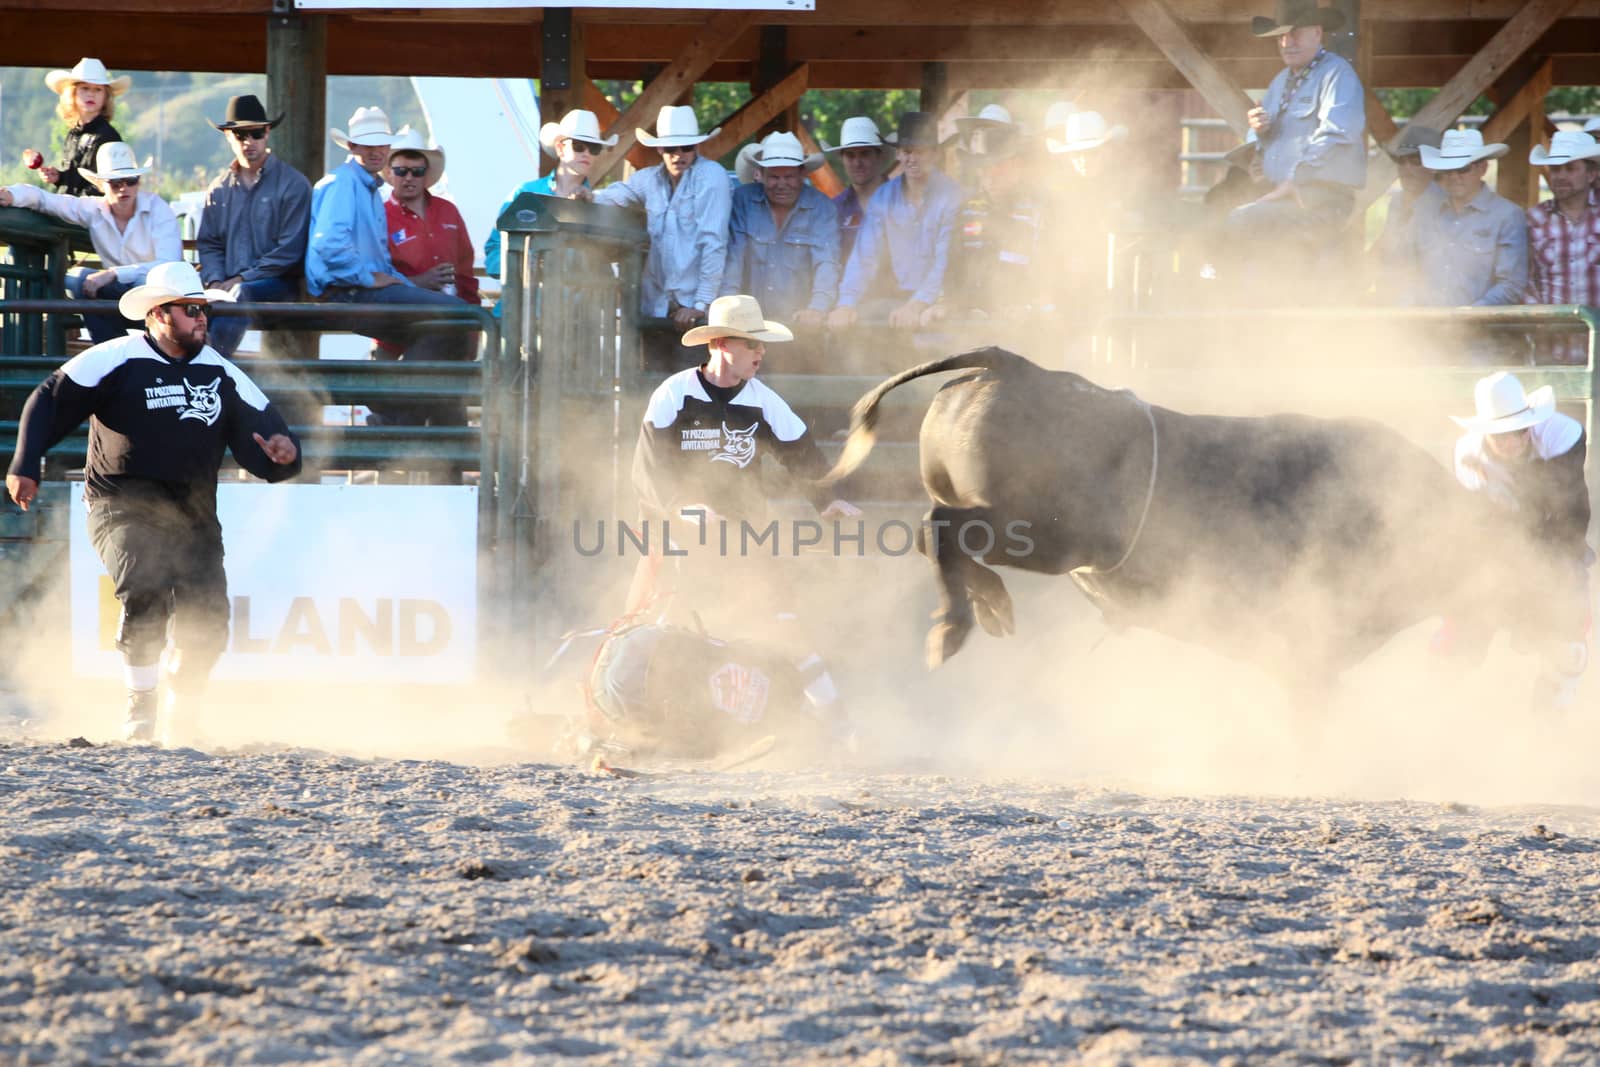 MERRITT, B.C. CANADA - May 30, 2015: Bull rider riding in the first round of The 3nd Annual Ty Pozzobon Invitational PBR Event.